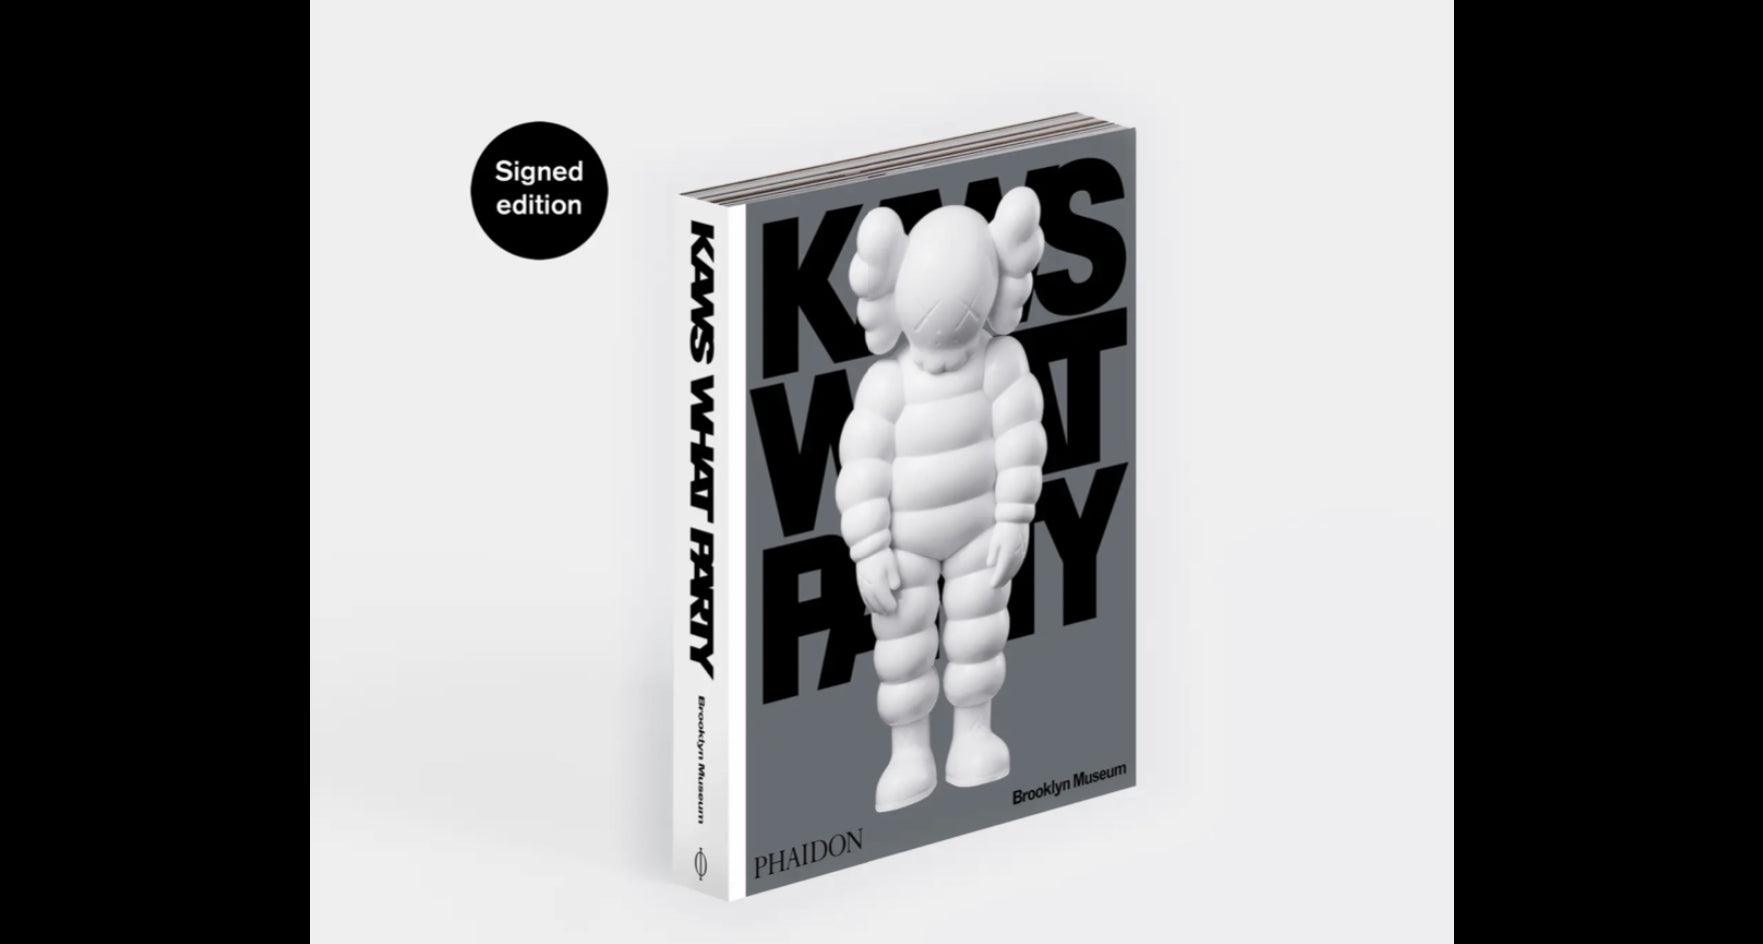 Book KAWS What Party Signed Edition ArtAndToys